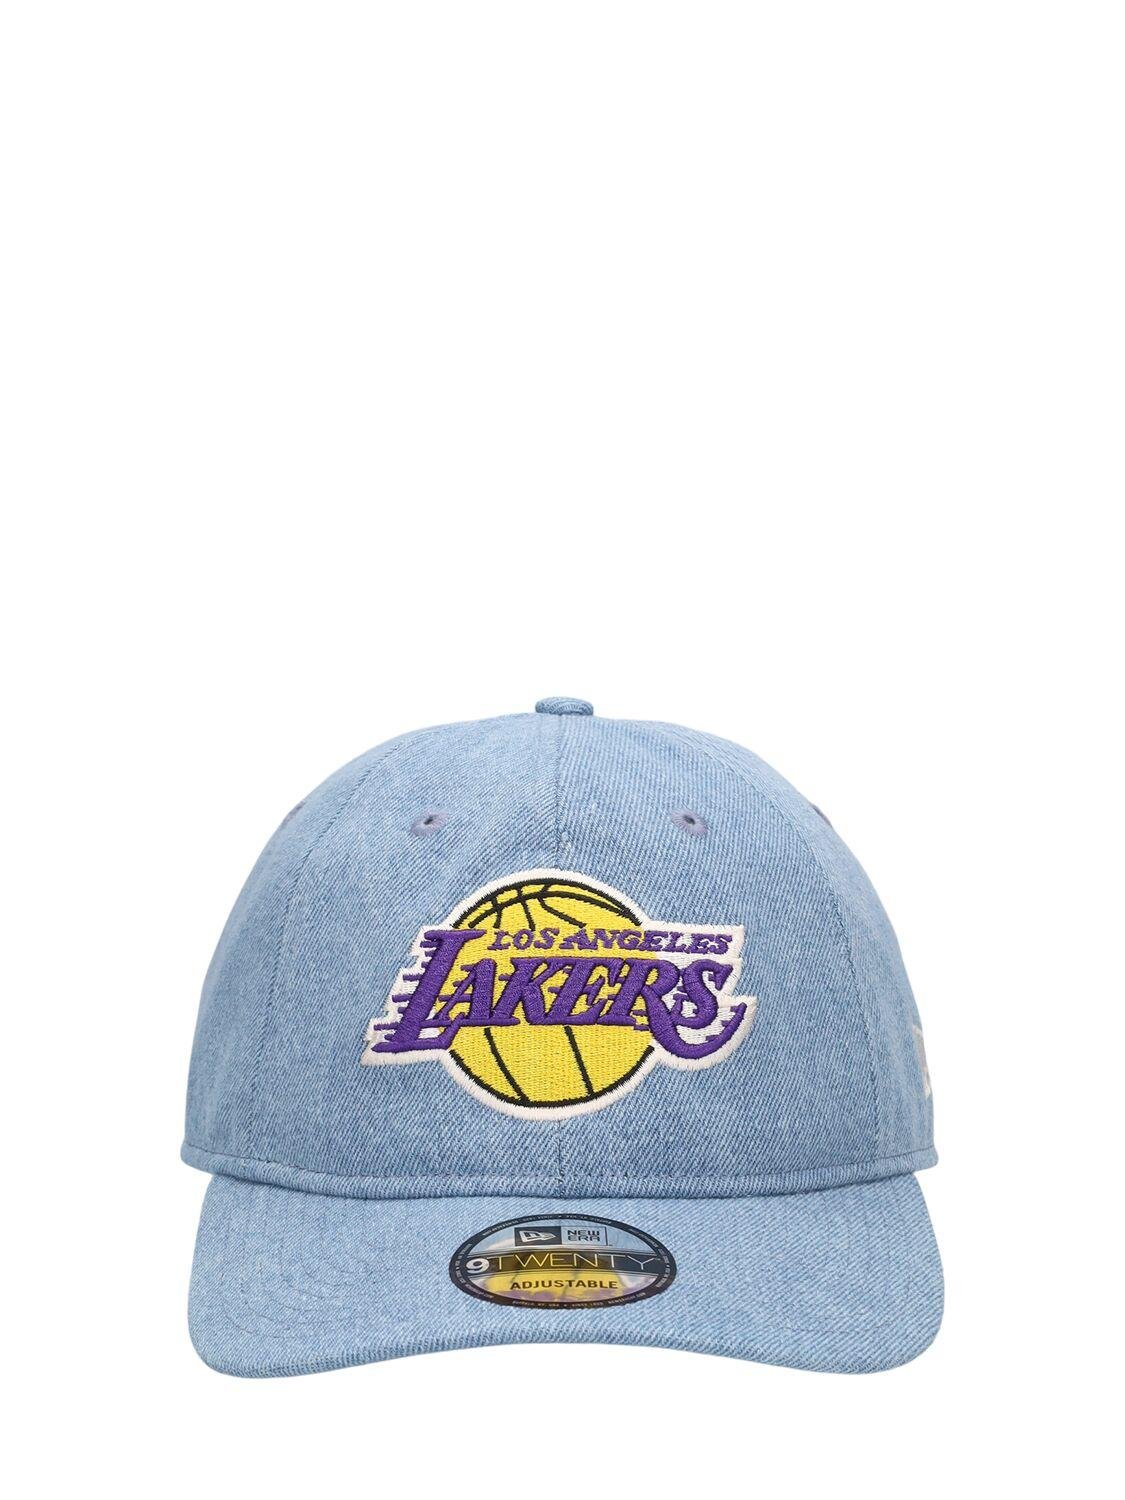 Washed Denim Los Angeles Lakers Cap by NEW ERA